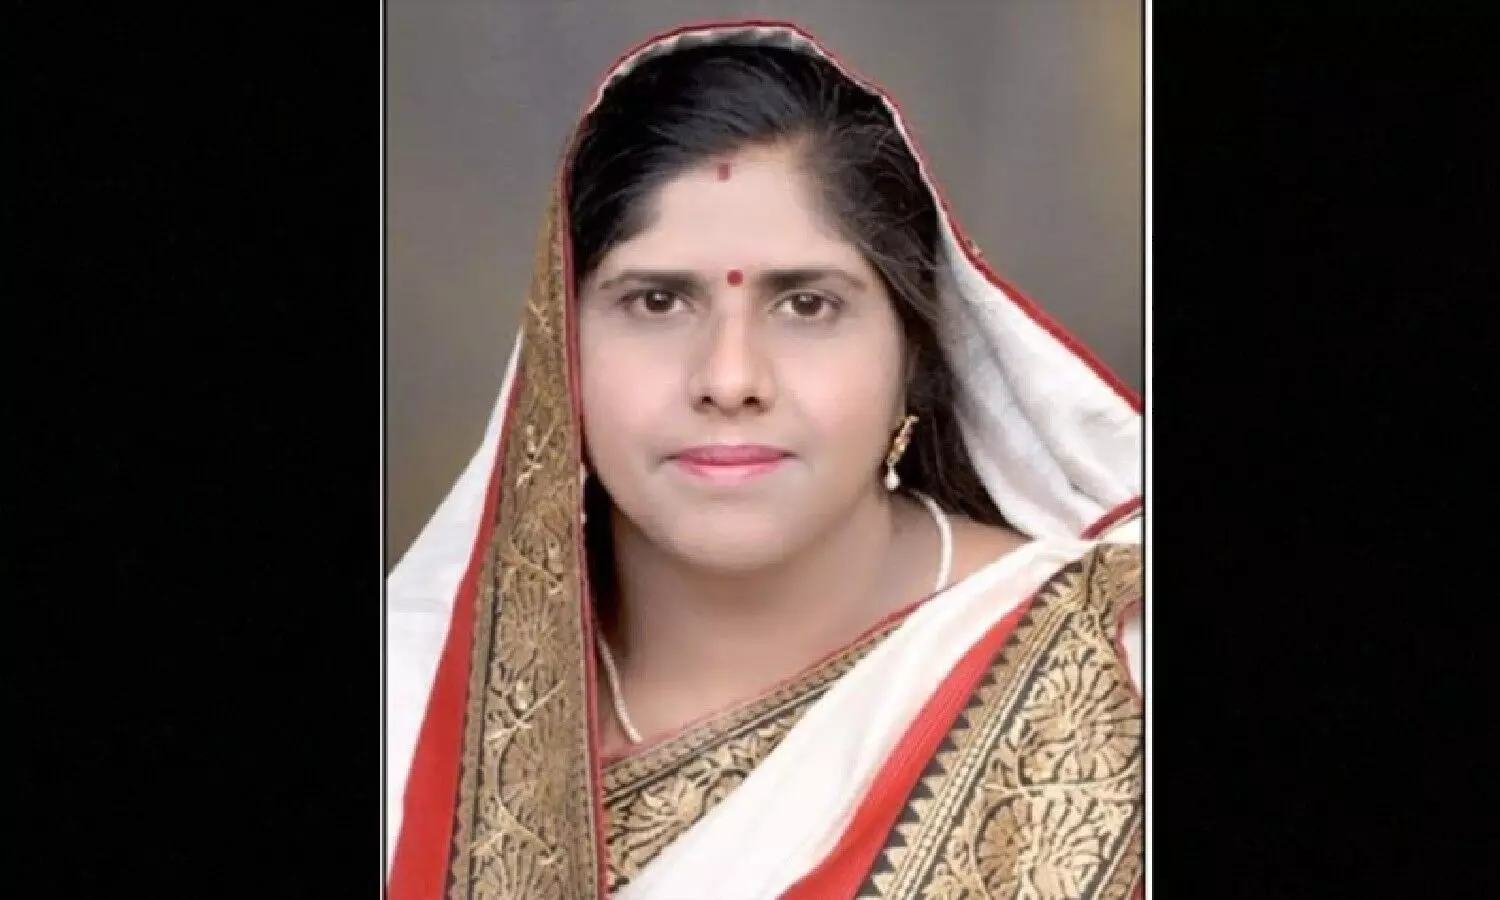 BJP candidate Dr Anamika Yadav won by 9 votes.